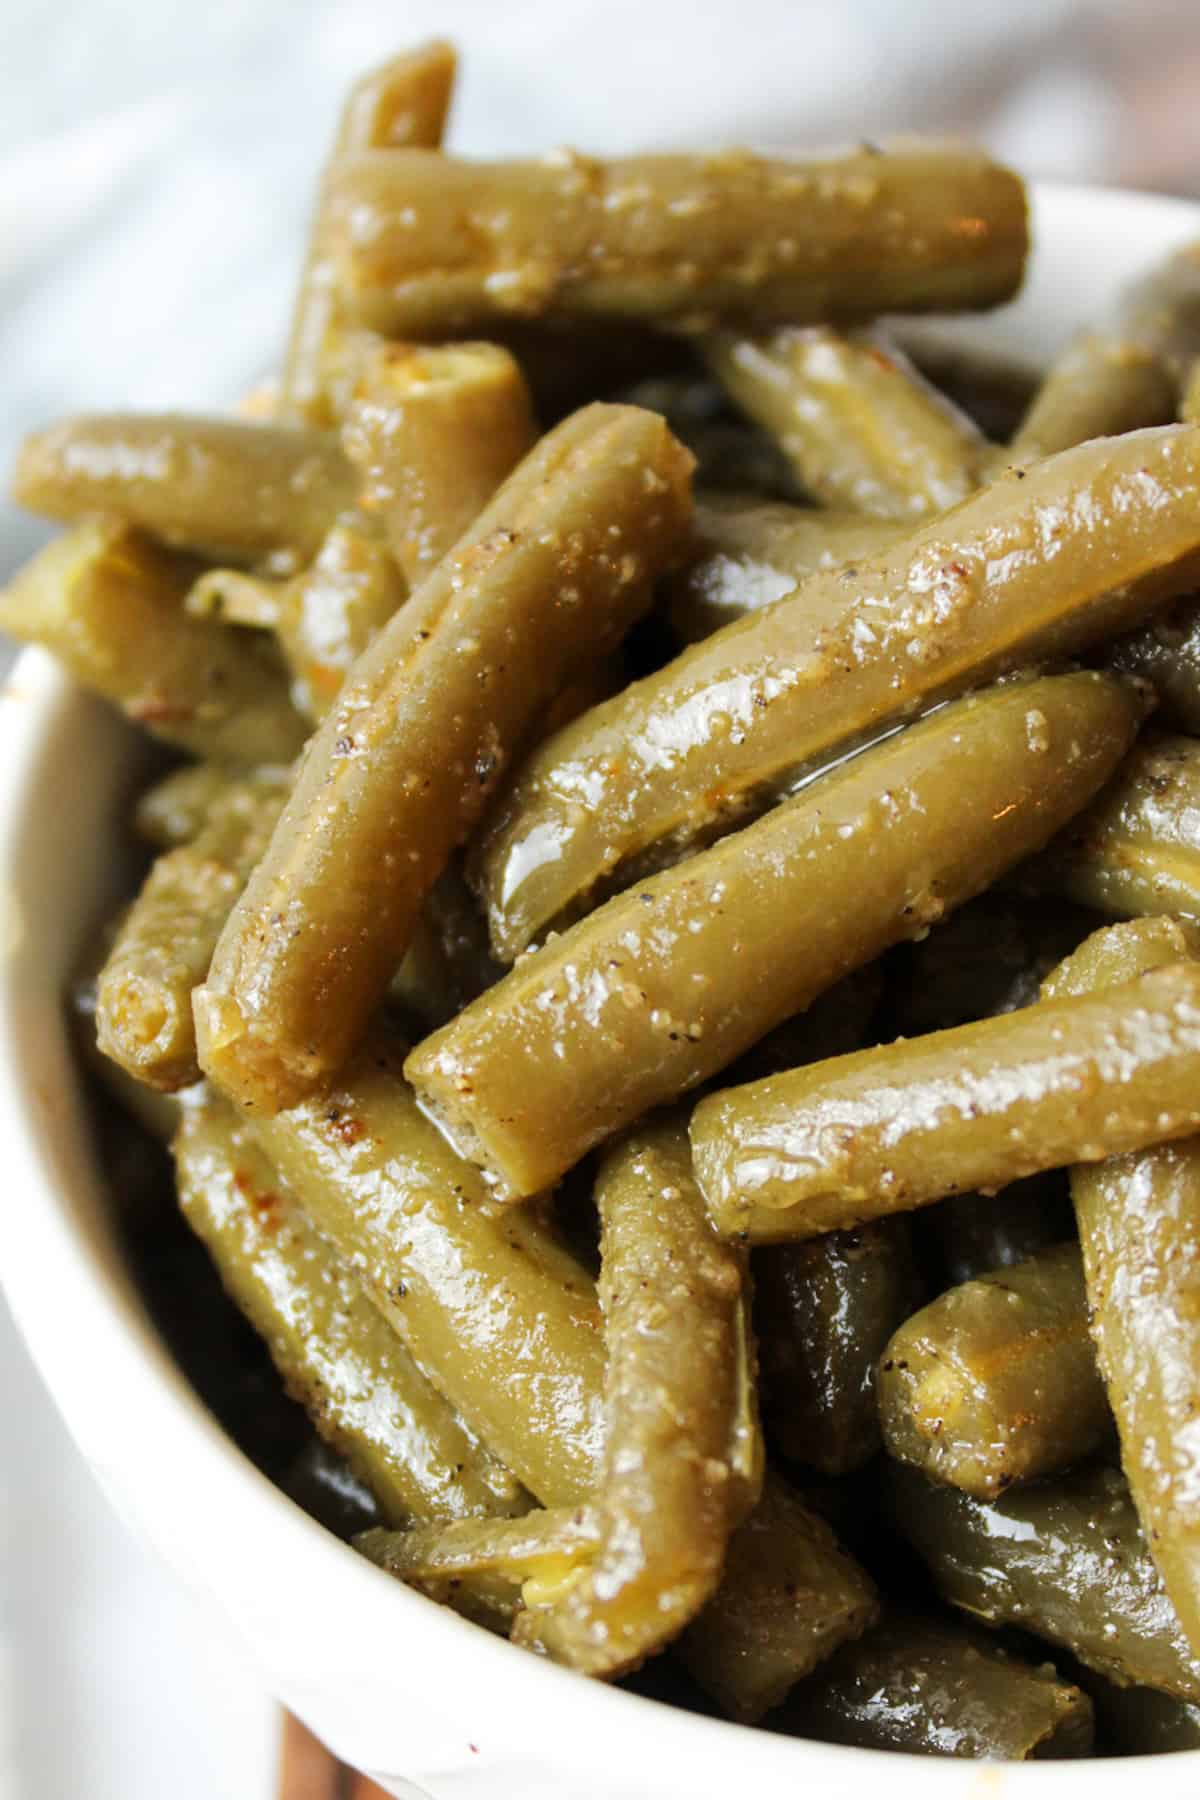 an upclose view of cooked canned green beans in a bowl